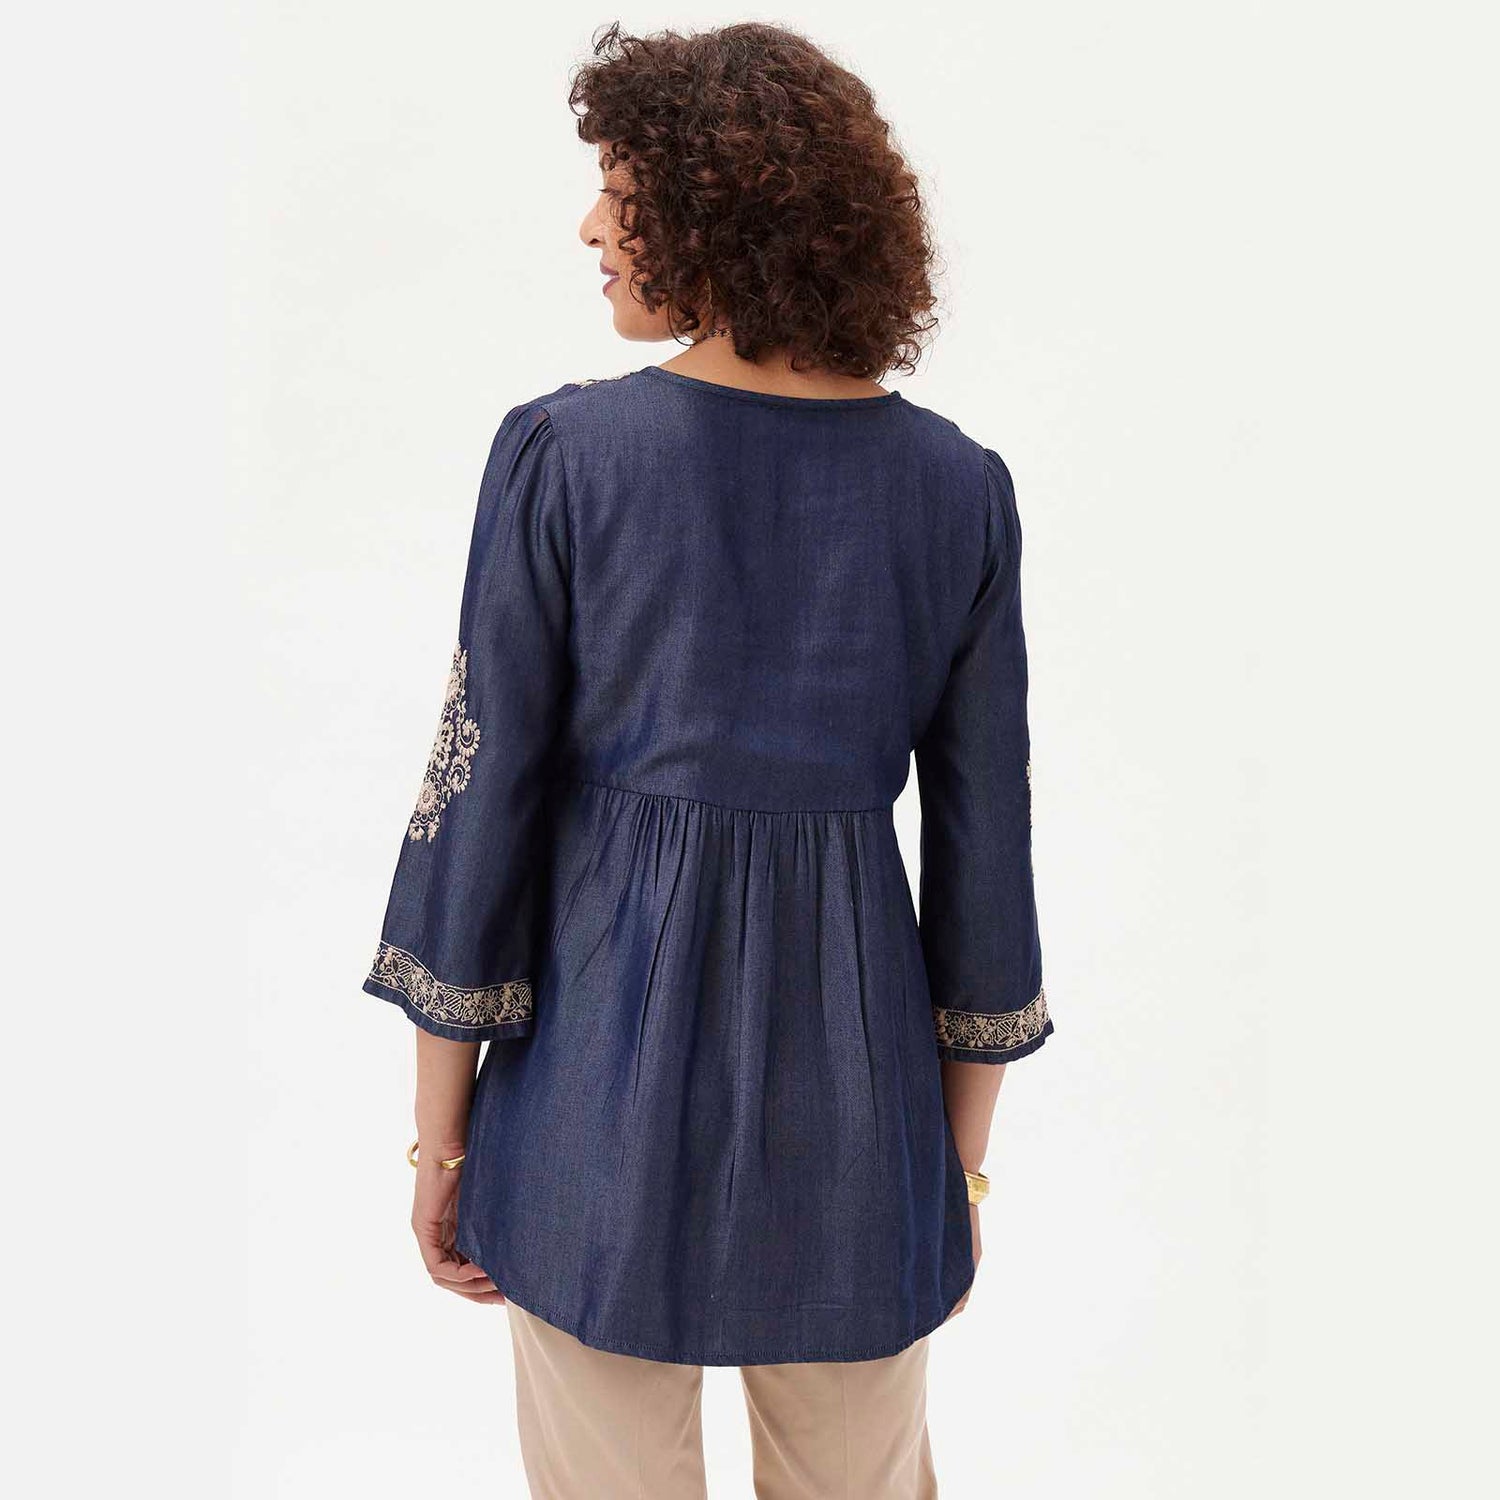 Denim Tencel Tunic with Tan Embroidery Embroidered Tunic - rockflowerpaper